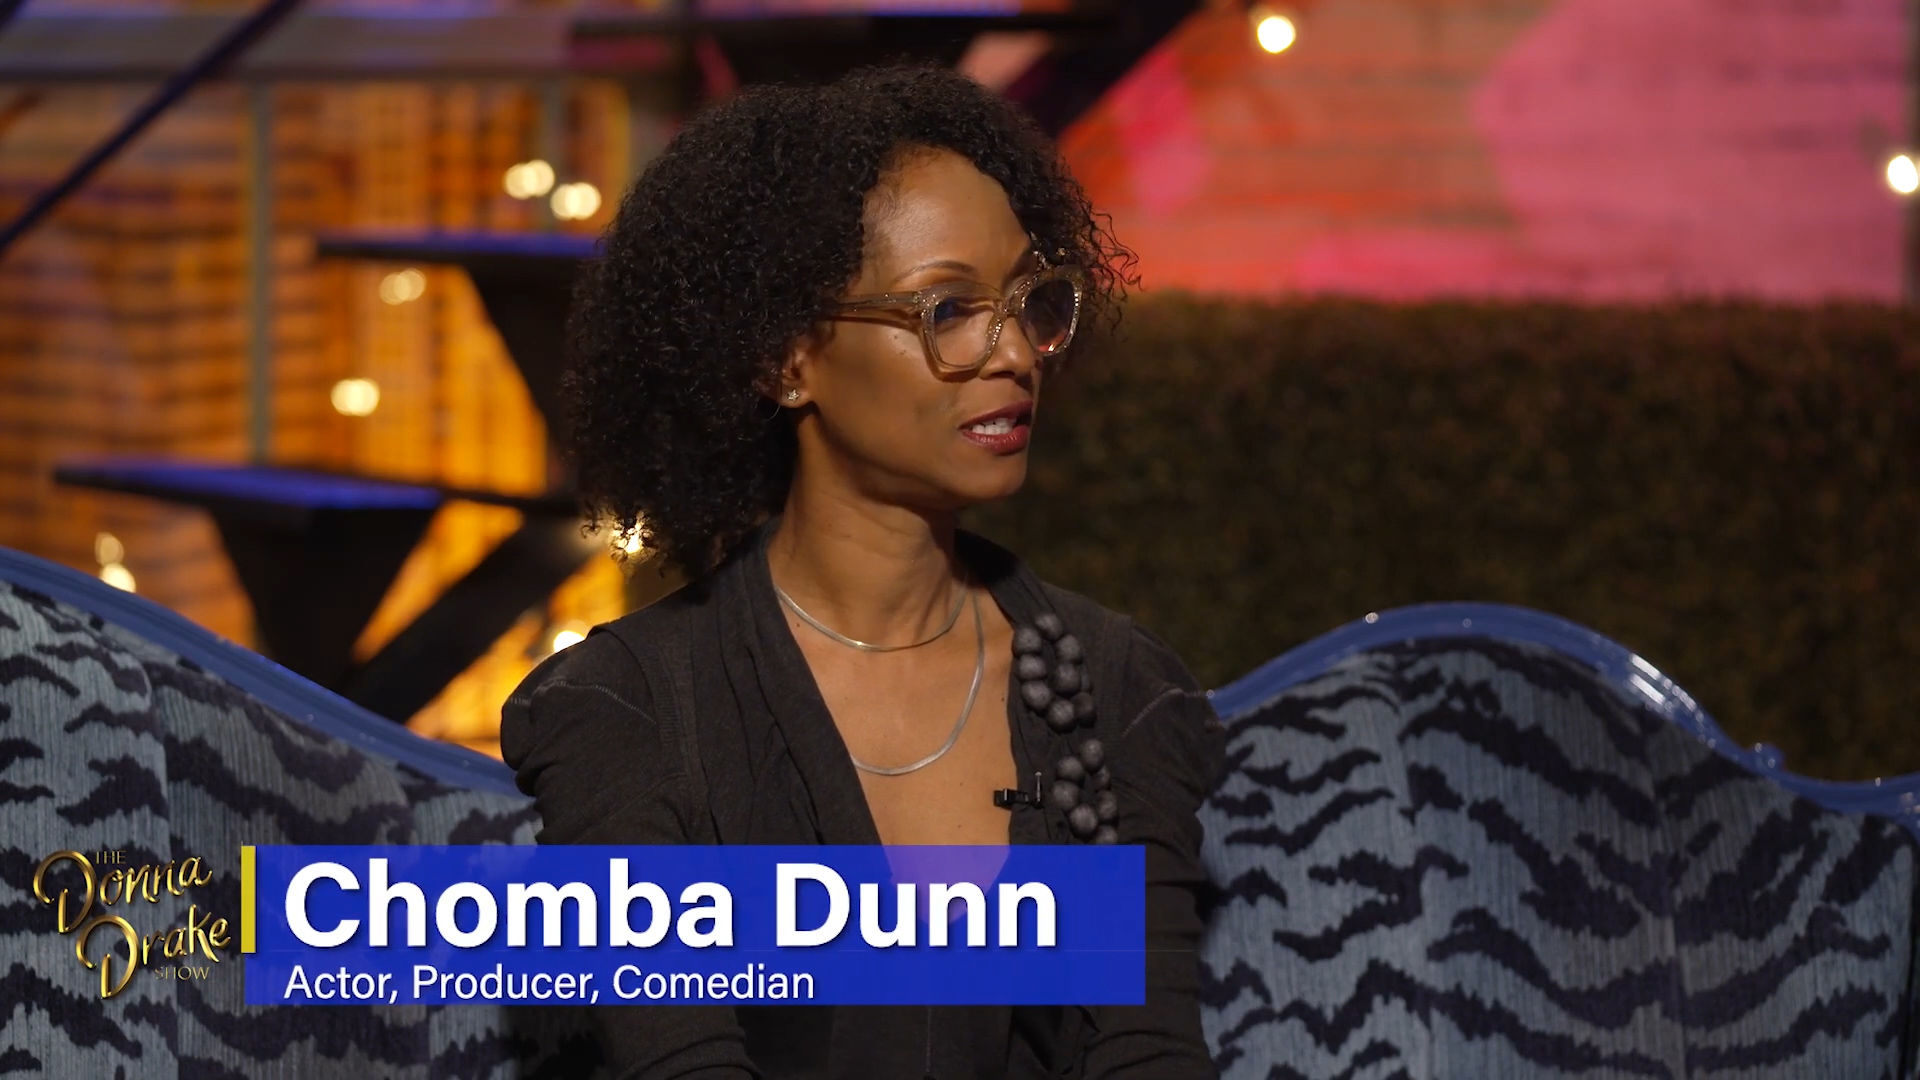 The Donna Drake Show Welcomes Chomba Dunn and Barton Adams of Homageland TV